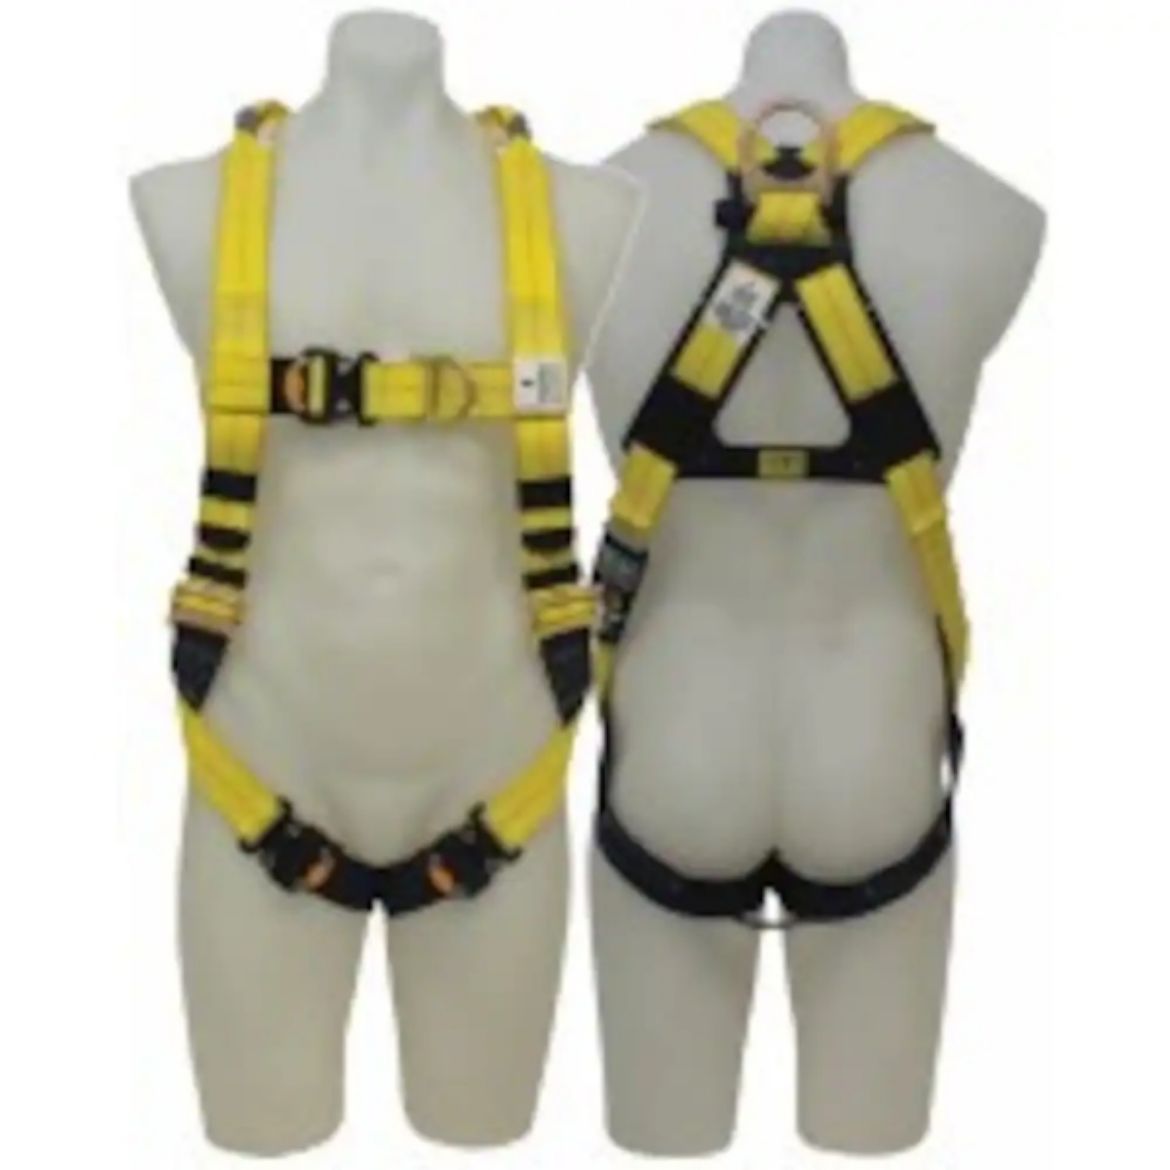 Picture of 803L0054 DELTA RIGGERS HARNESS - LARGE, WITH REAR STAND UP D-RING, FRONT FALL ARREST D-RING, QUICK CONNECT BUCKLES & CONFINED SPACE LOOPS